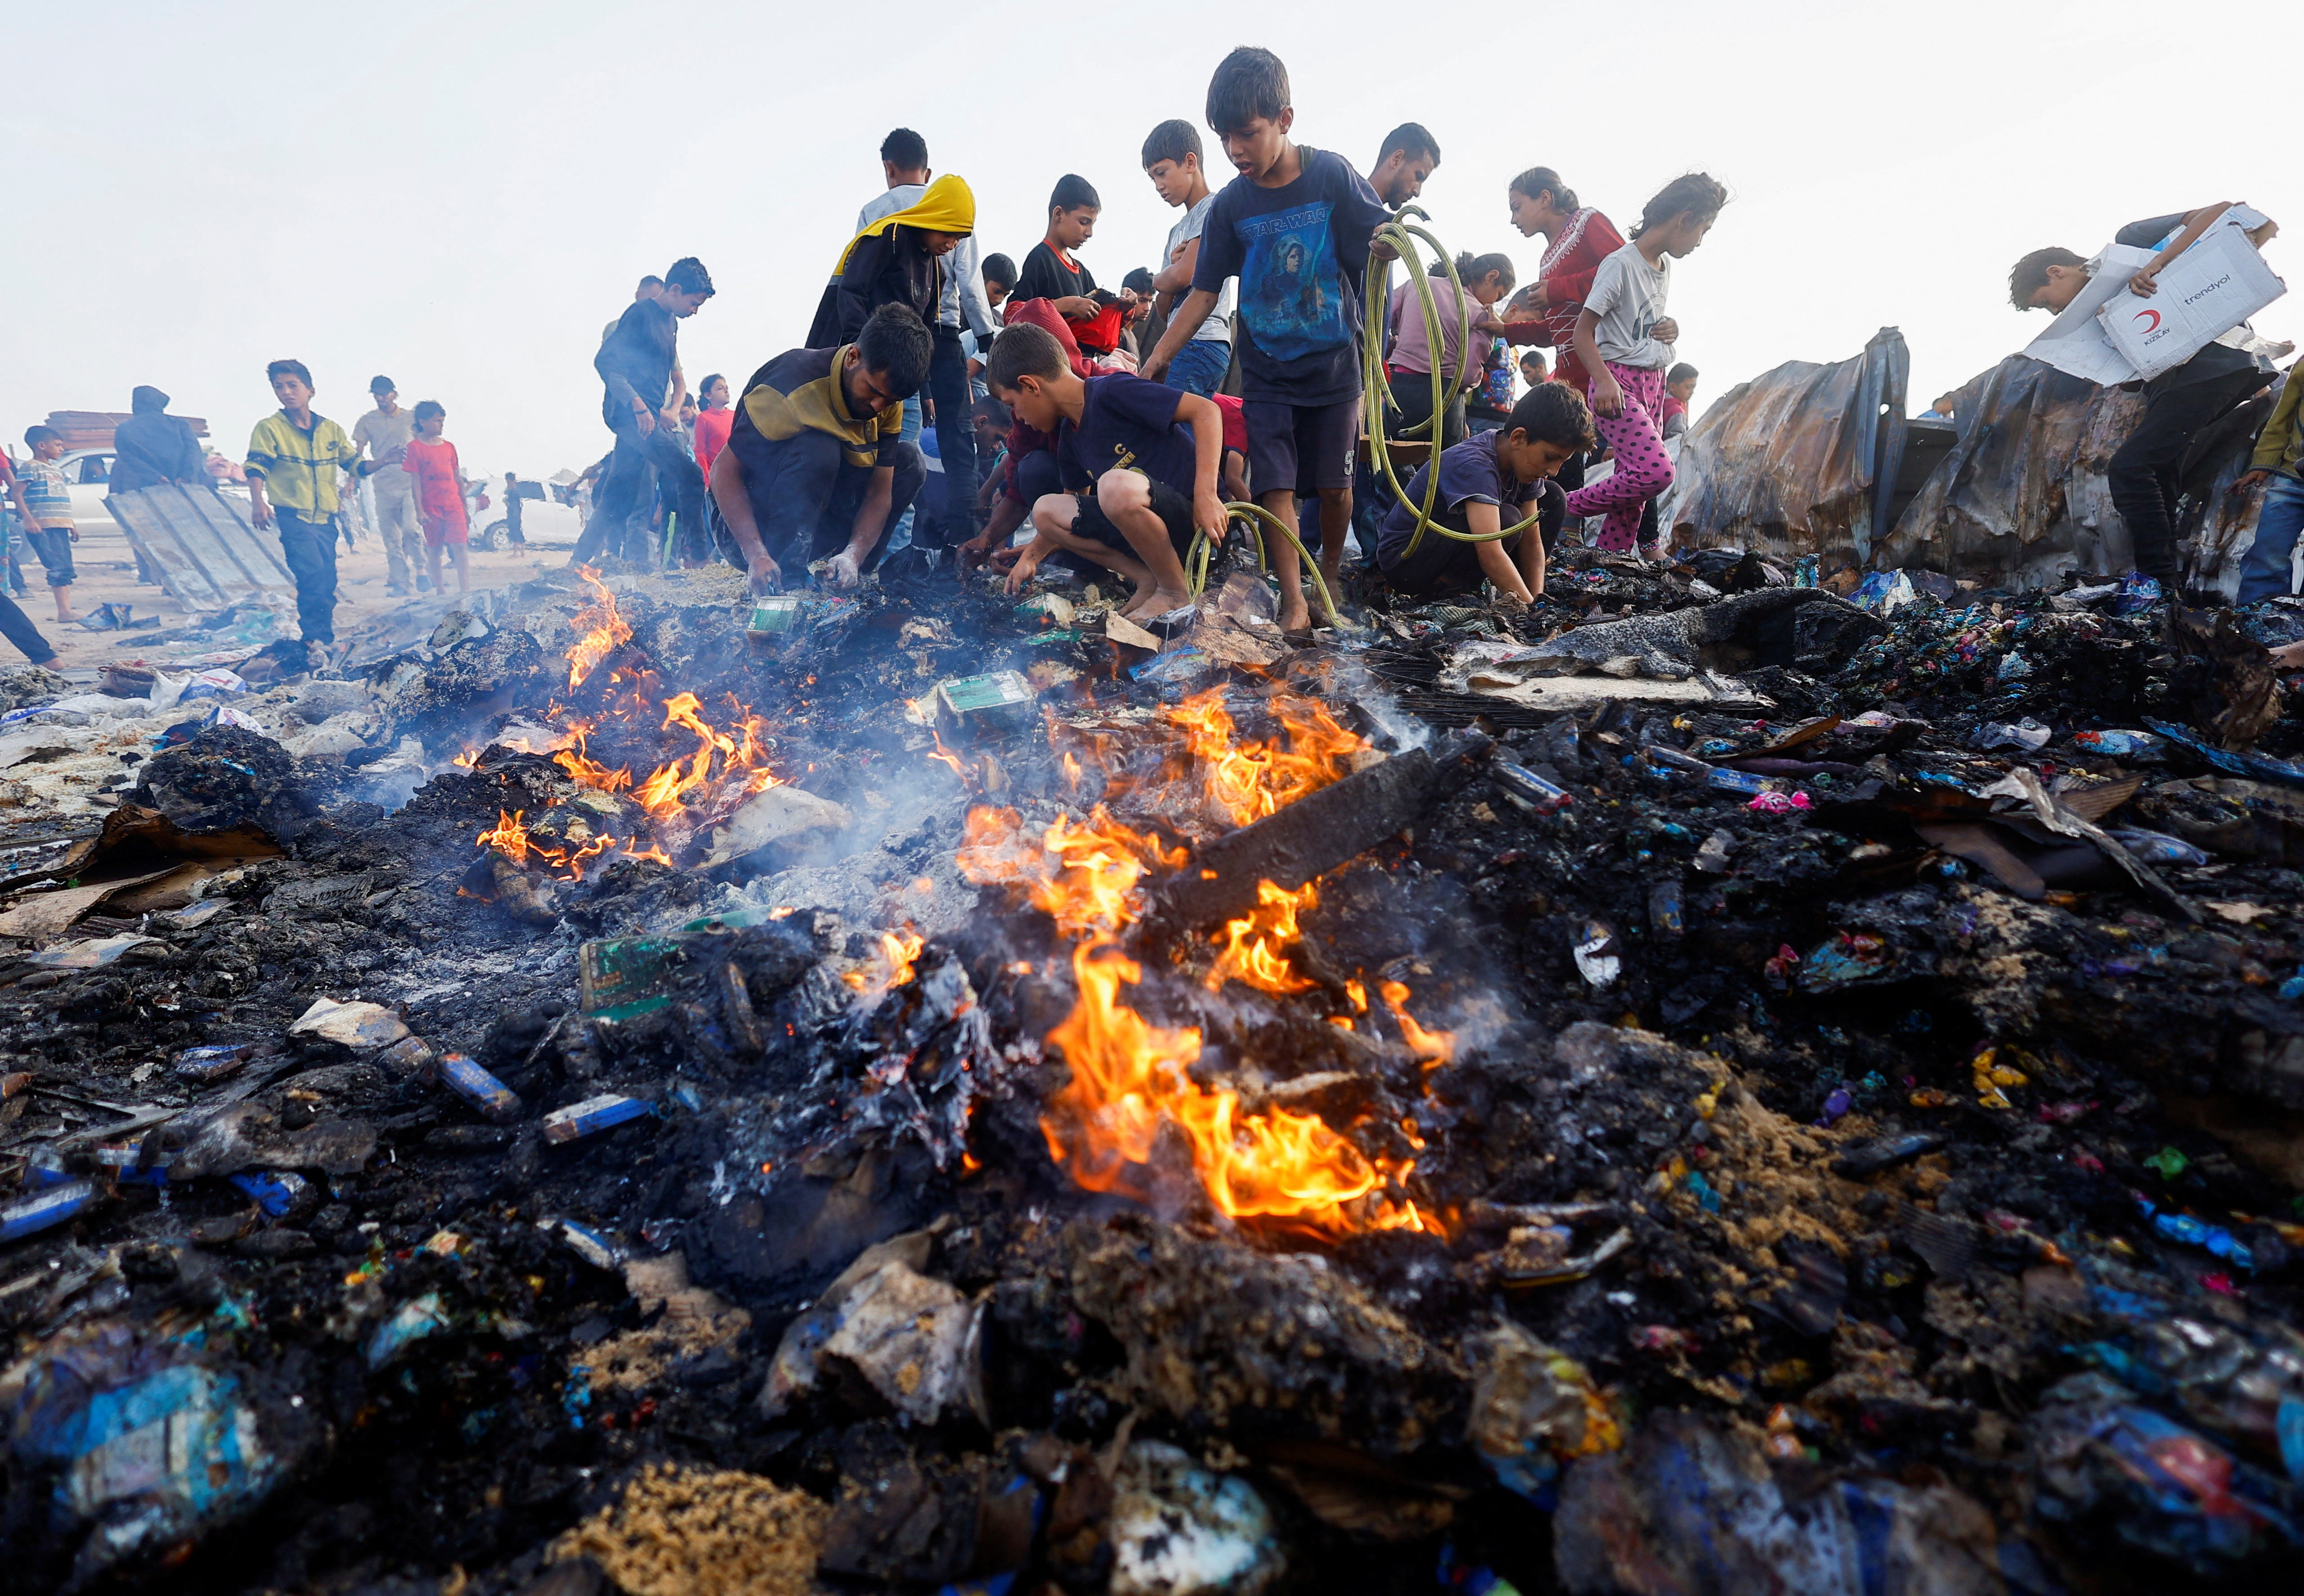 Palestinians search for food among burnt debris in the aftermath of an Israeli strike on Rafah